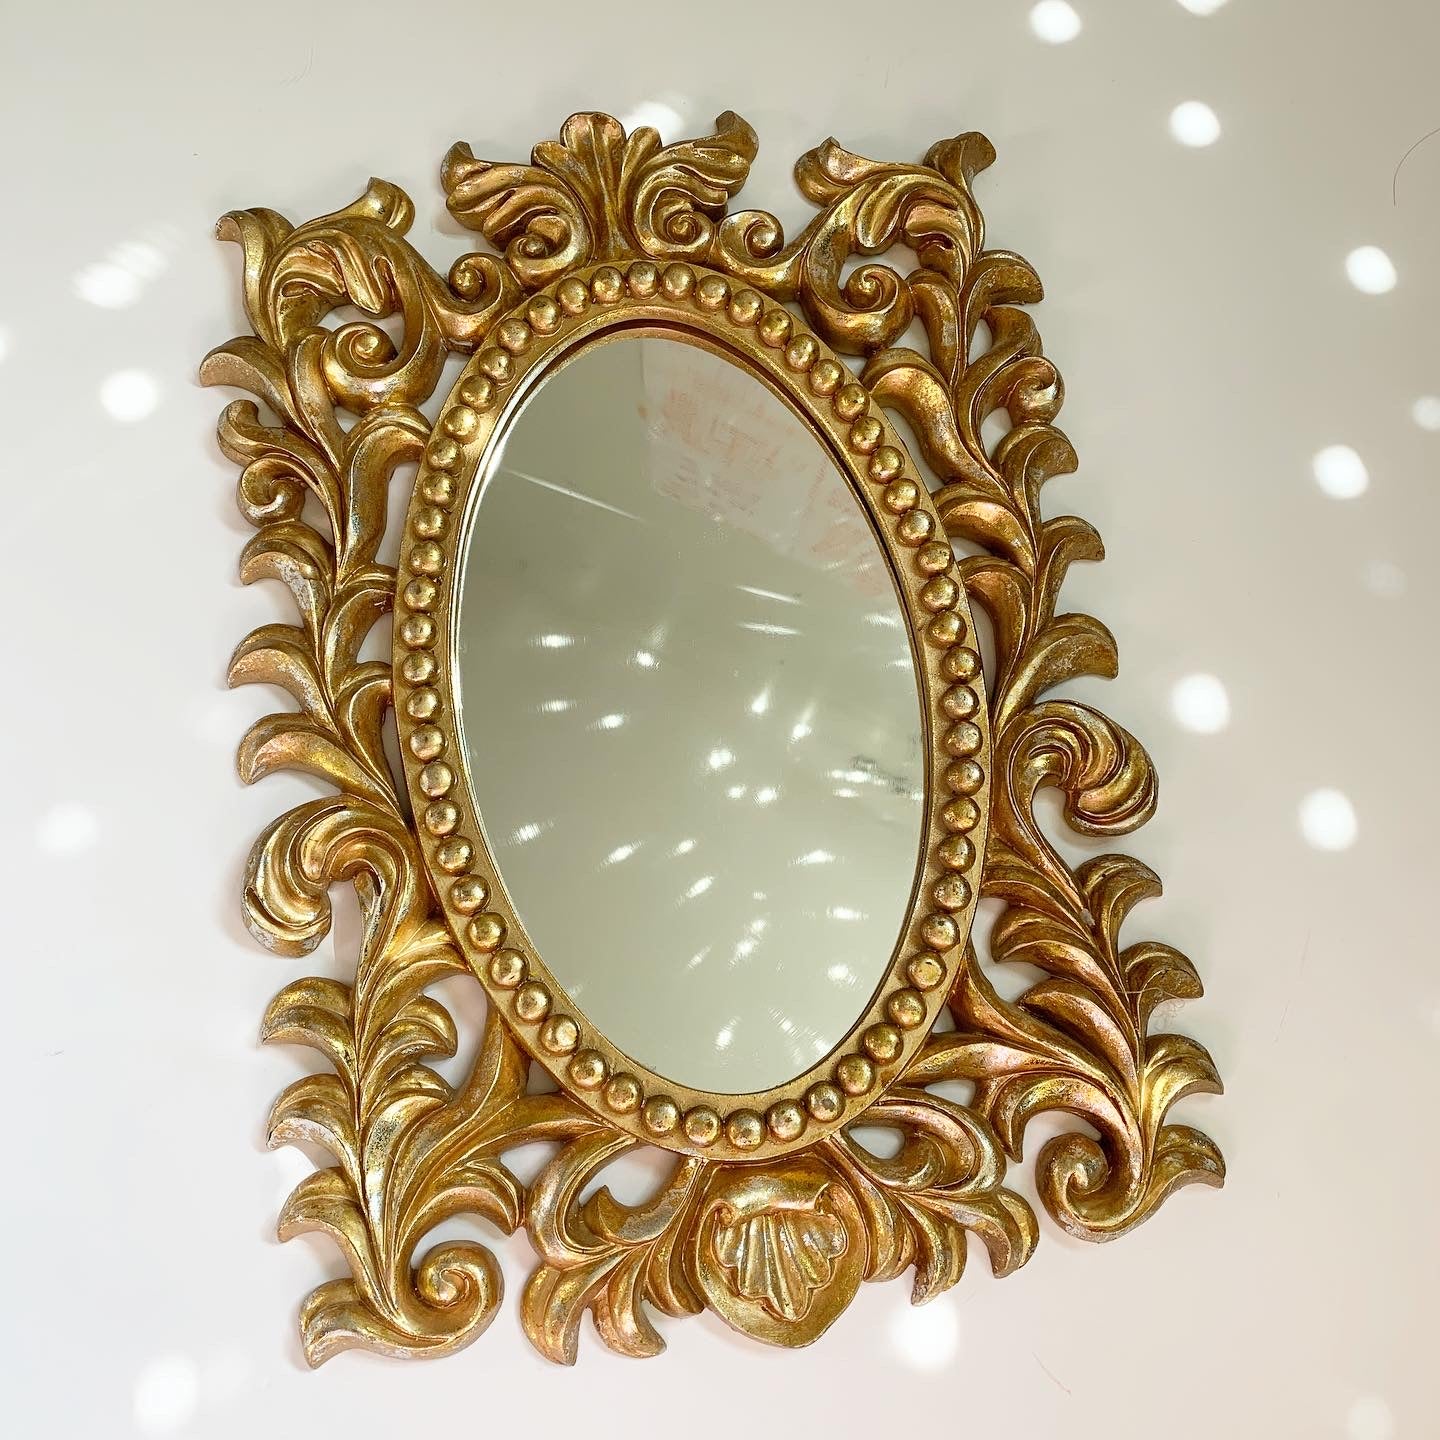 Antique Gold Finish Distressed Oval Mirror